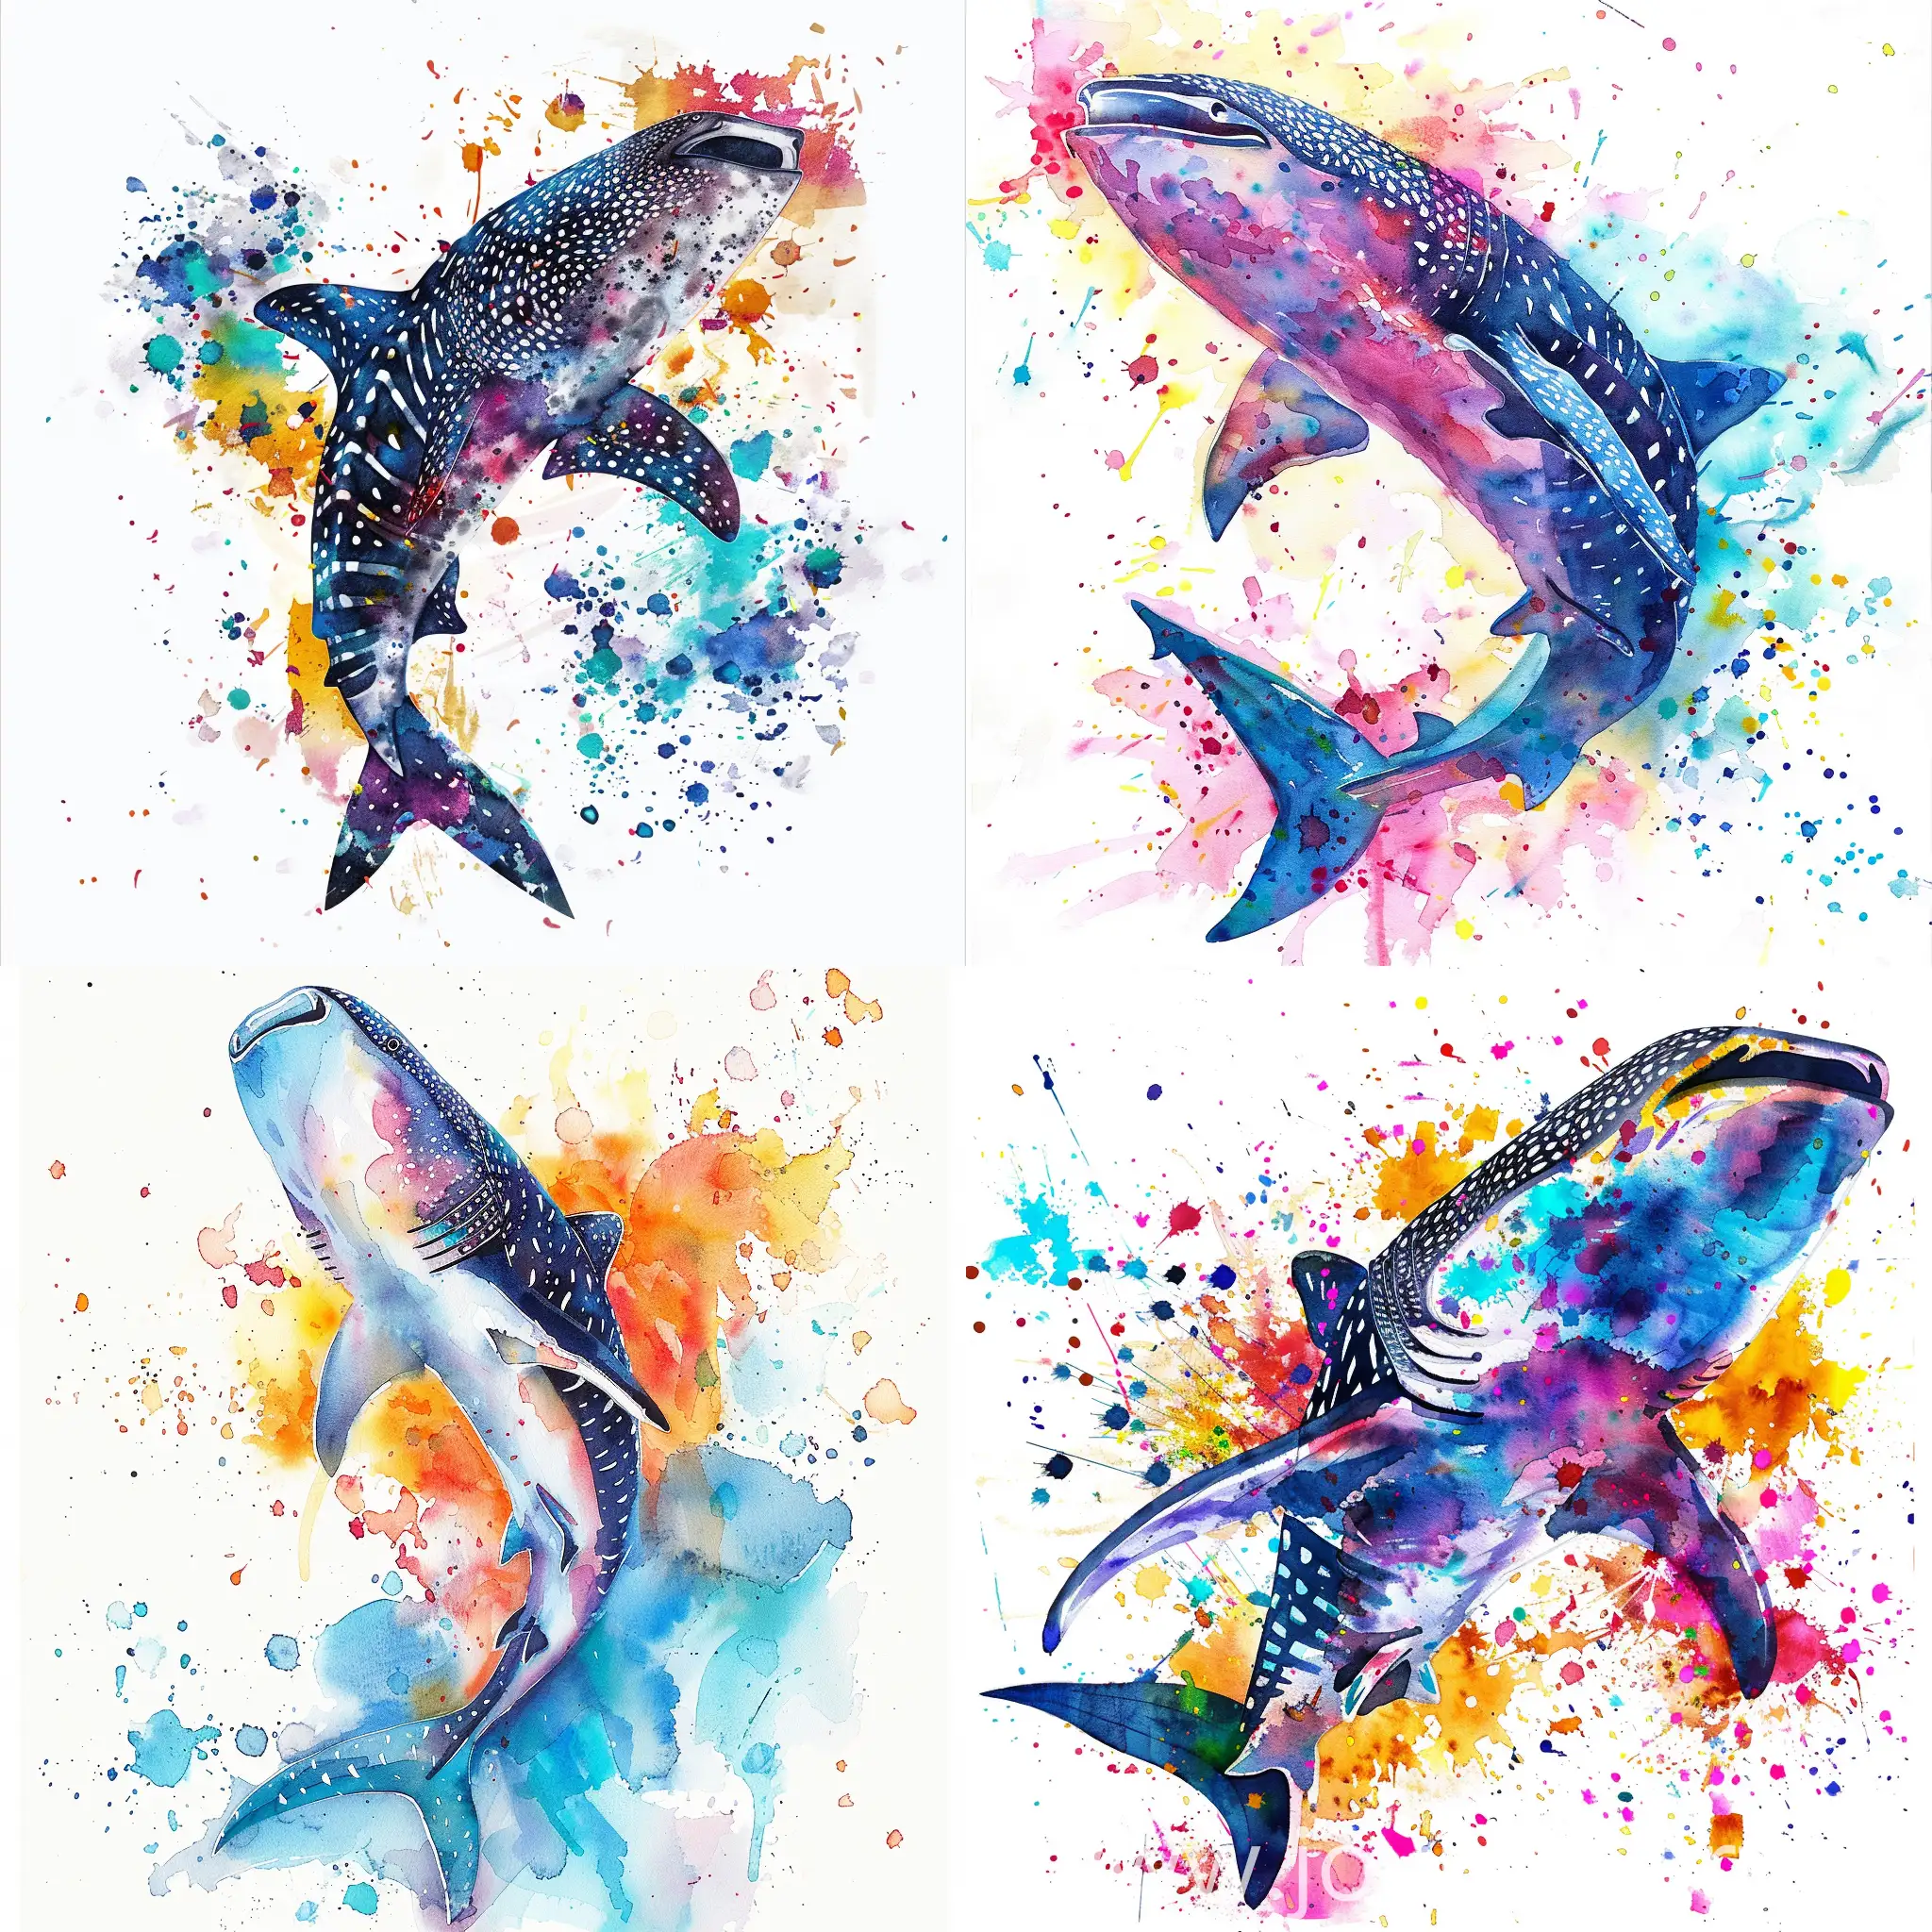 Whale-Shark-Watercolor-Painting-Vibrant-and-Artistic-Marine-Life-Illustration